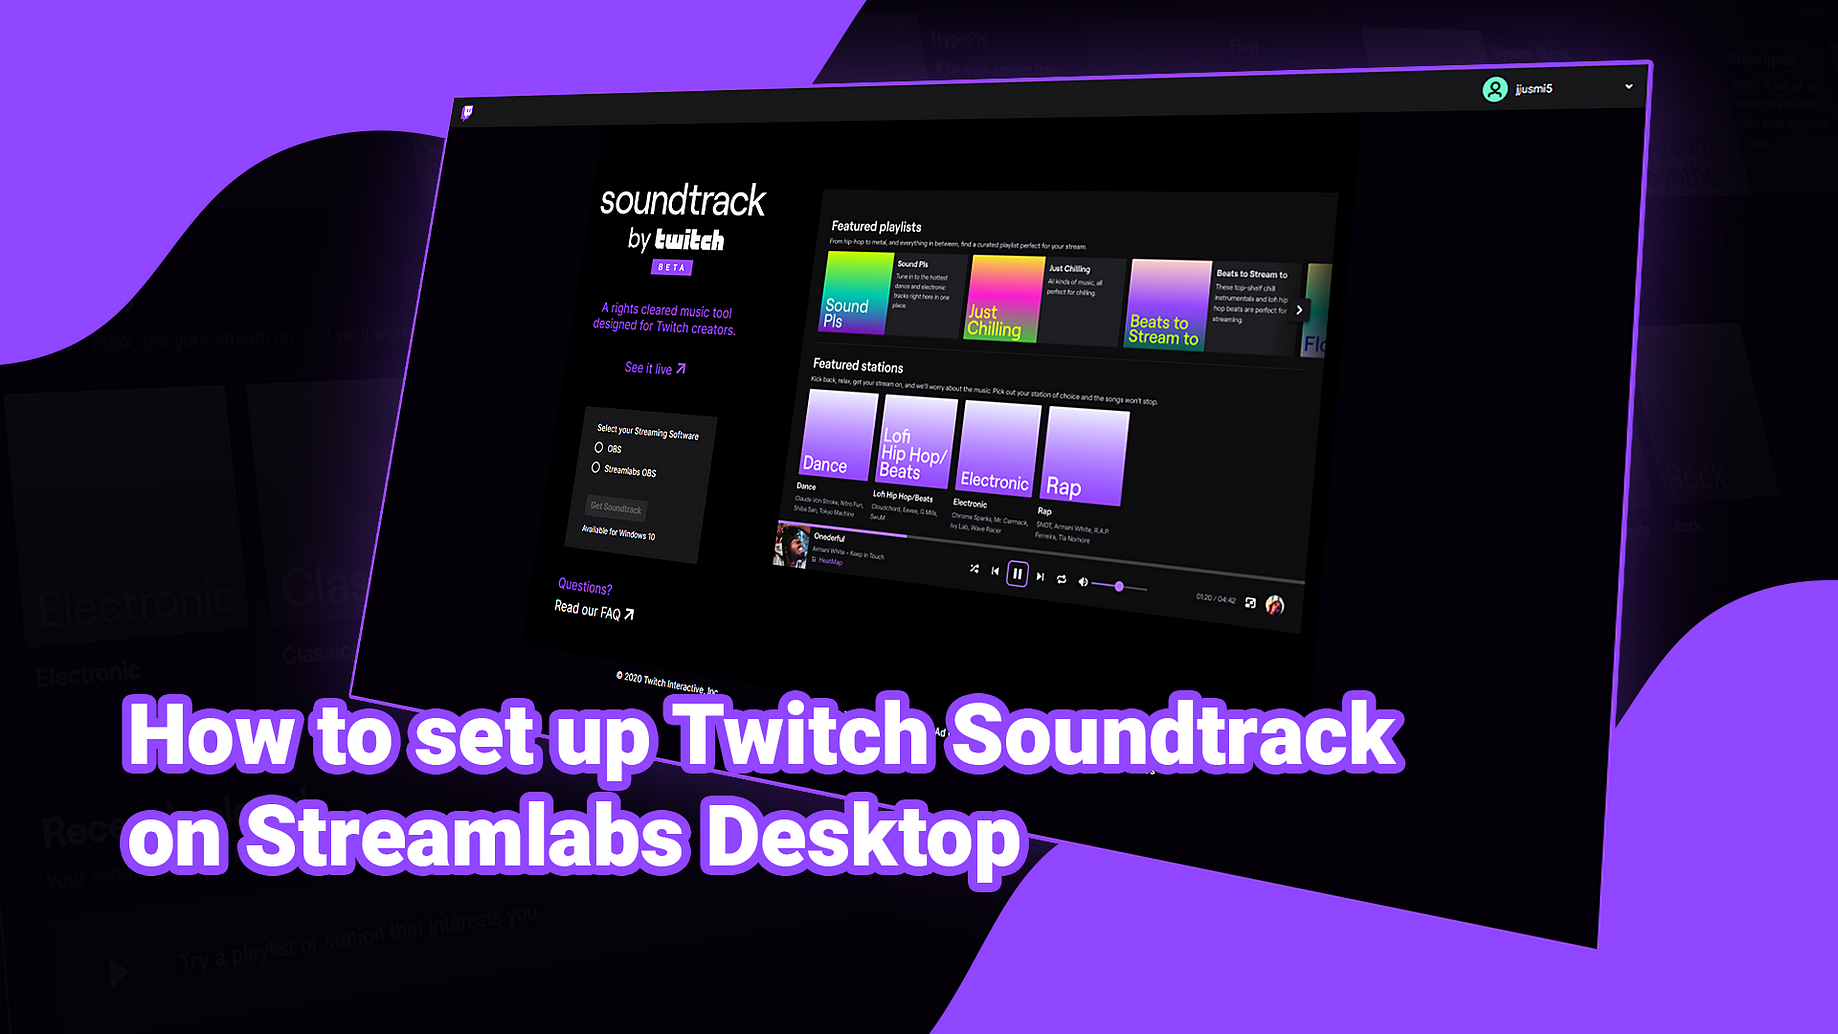 How to set up Twitch Soundtrack on Streamlabs Desktop | by Ethan May |  Streamlabs Blog